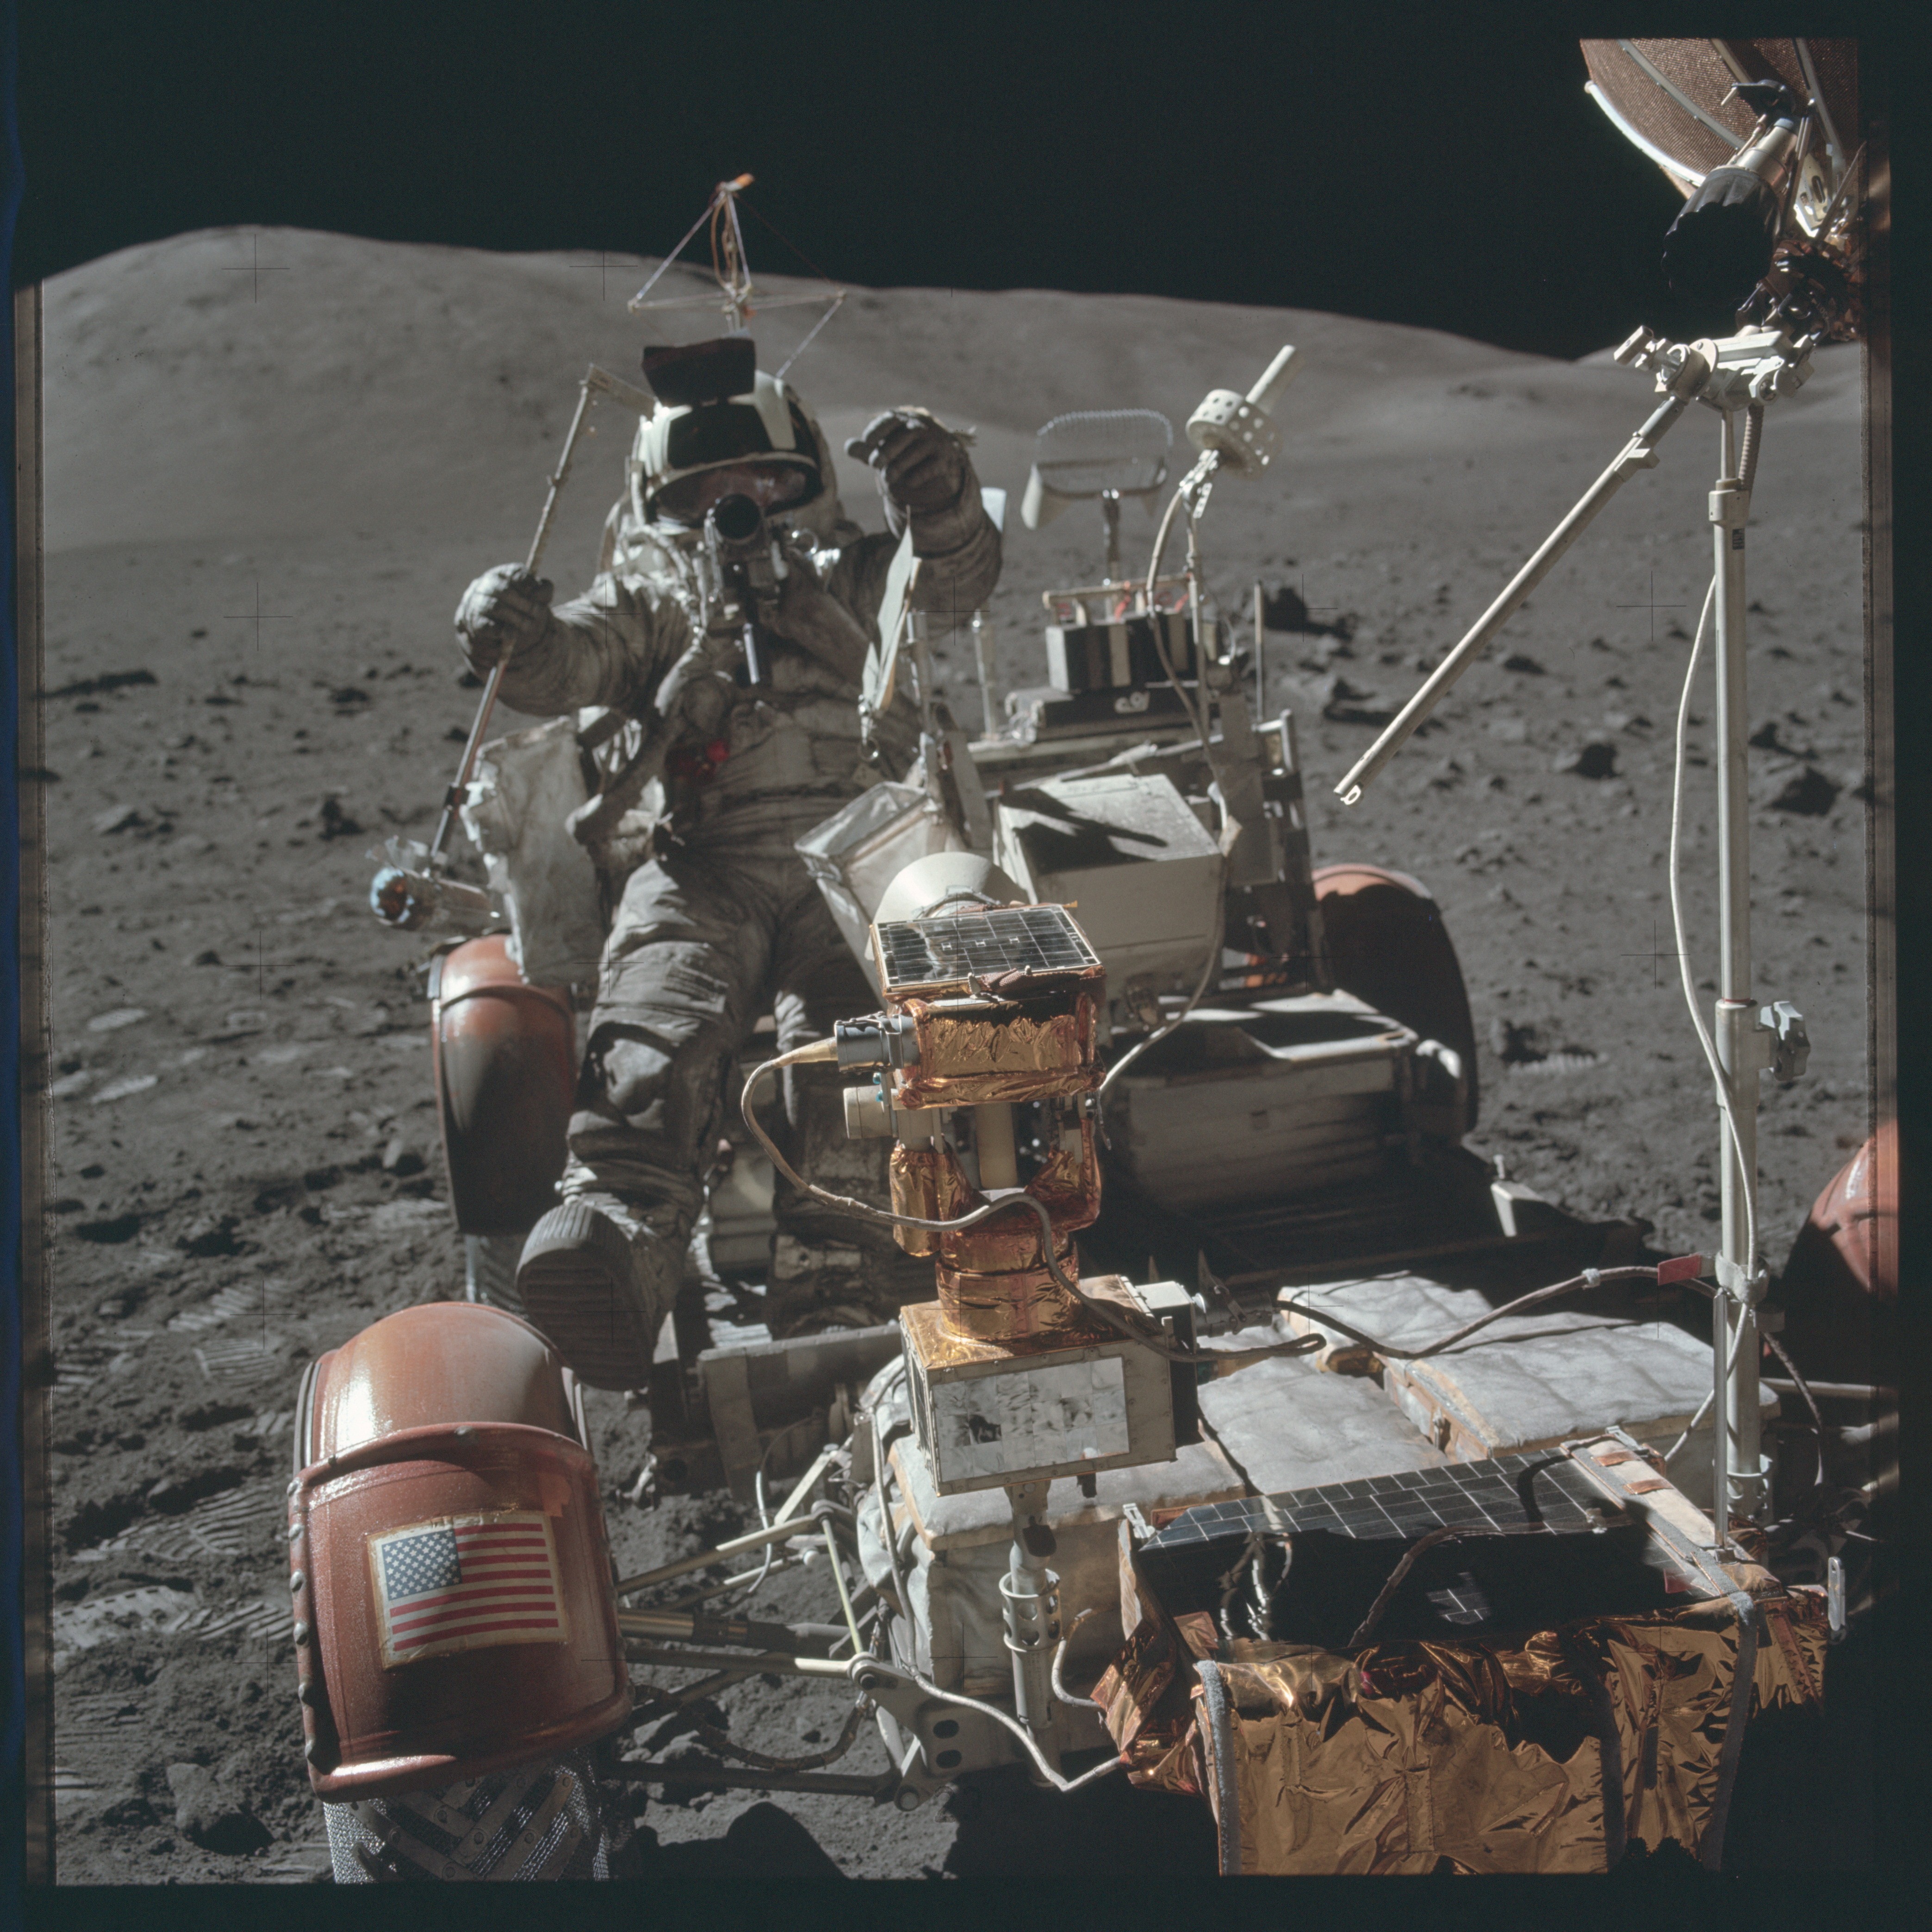 Scientist-astronaut Harrison Schmitt is photographed seated in the Lunar Roving Vehicle (LRV) at Station 9 (Van Serg Crater) during the third Apollo 17 extravehicular activity (EVA) at the Taurus-Littrow landing site during the Apollo 17 mission in this December 13, 1972 NASA handout photo. Photo: Reuters